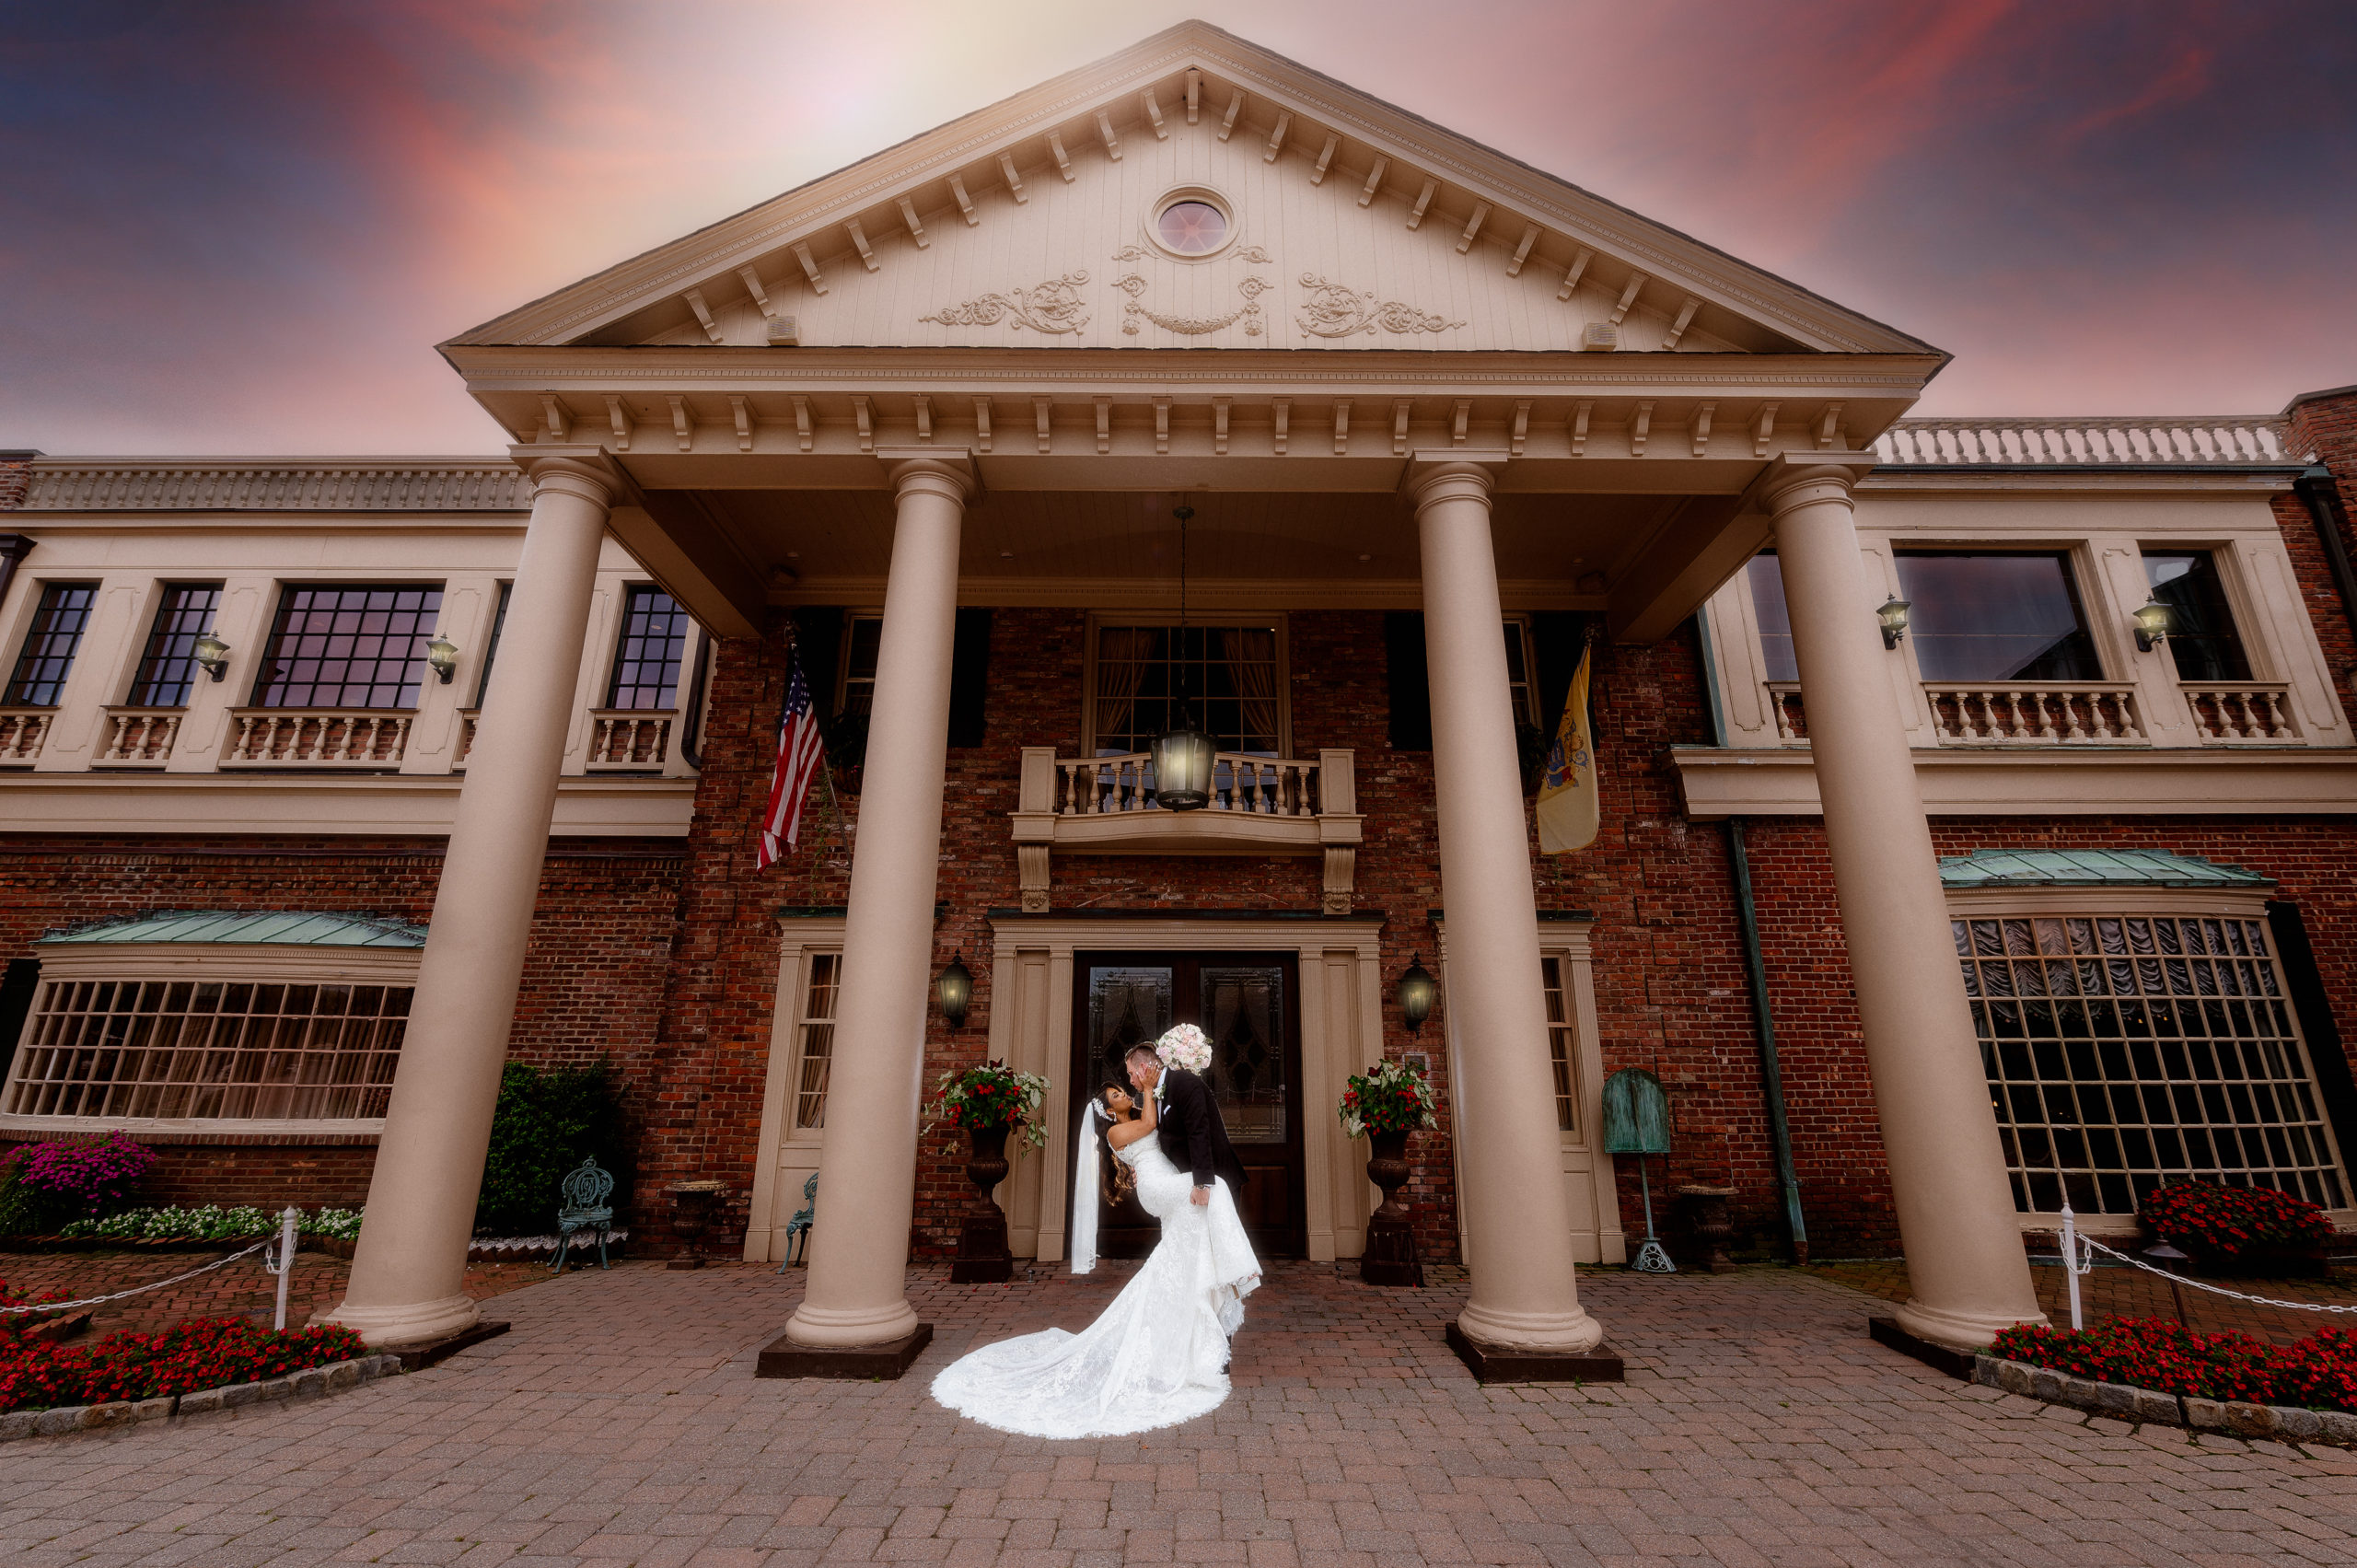 dreamy-magical-fine-art-wedding-photo-by-suess-moments-at-the-manor-new-jersey